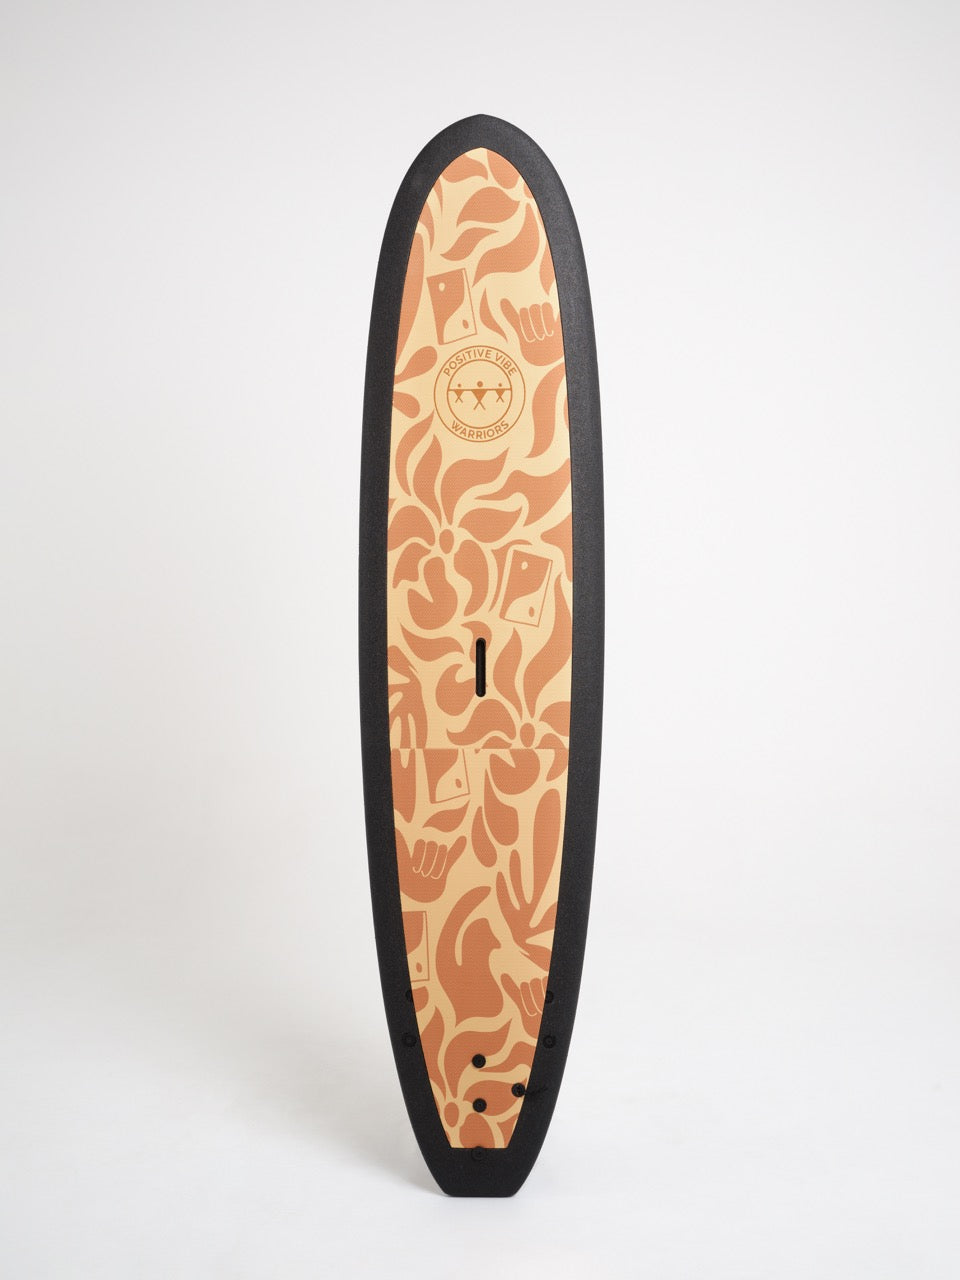 A black and beige 8 foot Positive Vibe Warriors Scout surfboard with a brown flower illustration on a white background